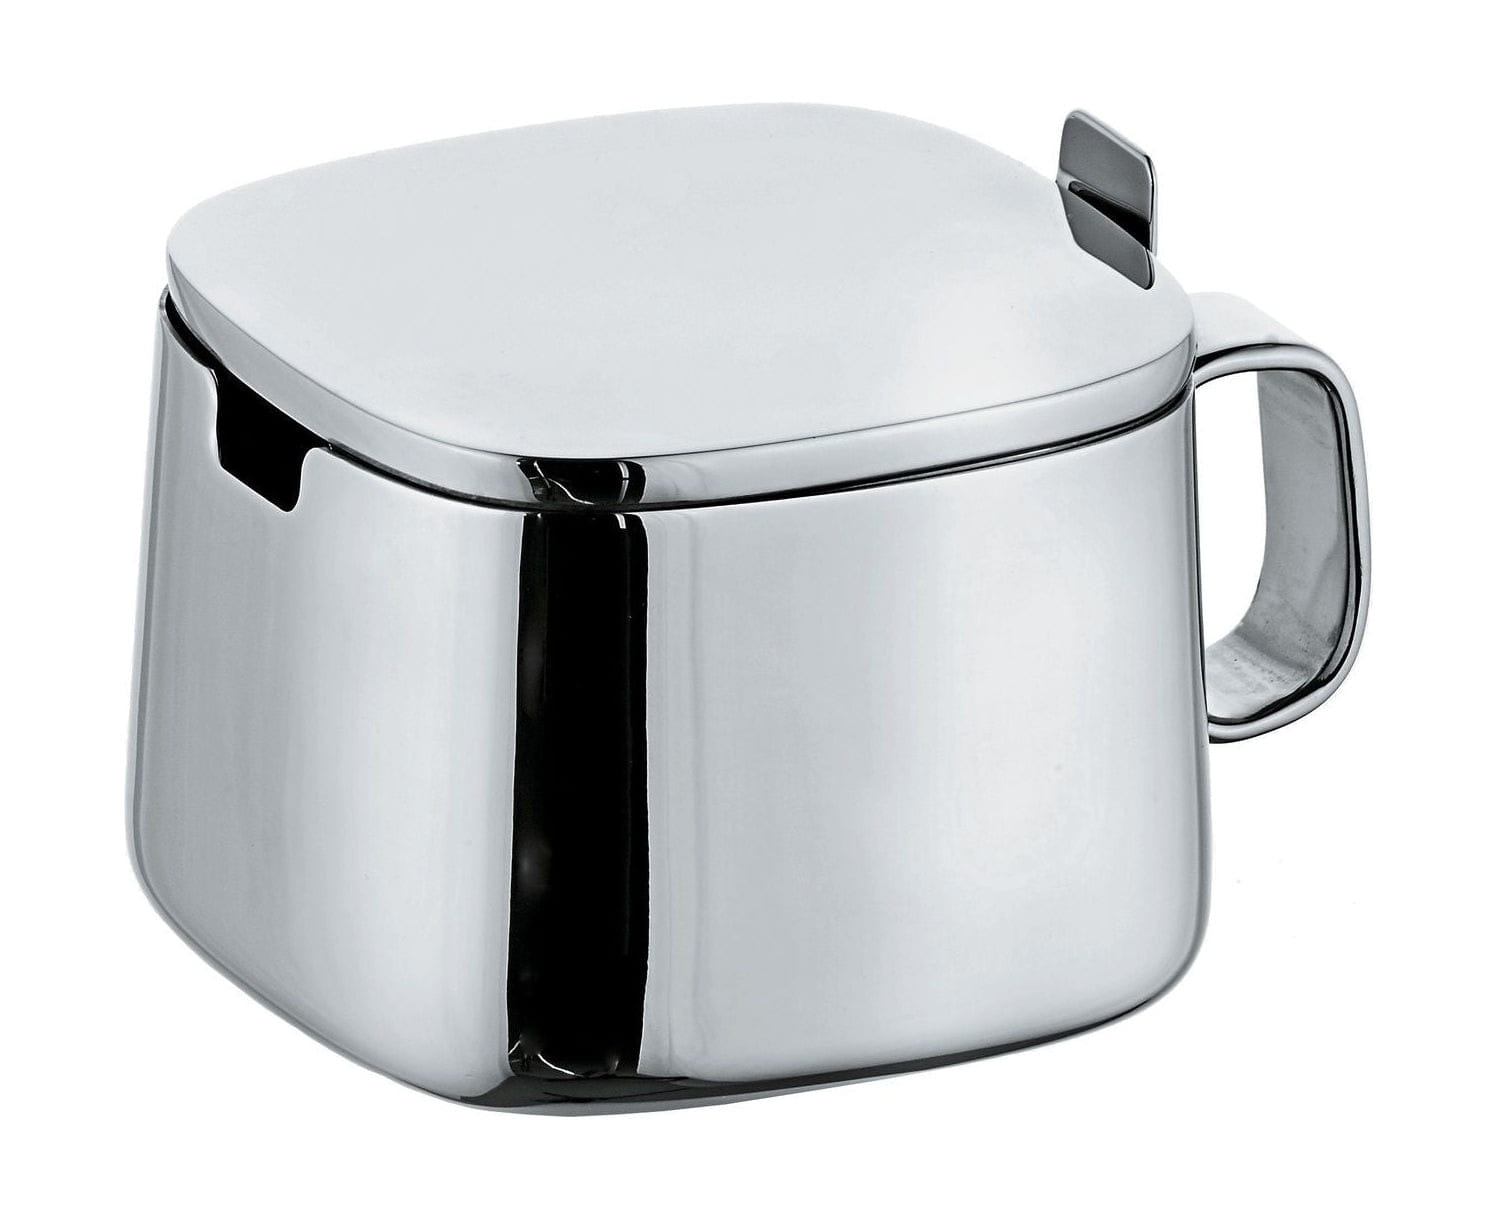 Alessi A404 Stainless Steel Sugar Bowl 30 Cl